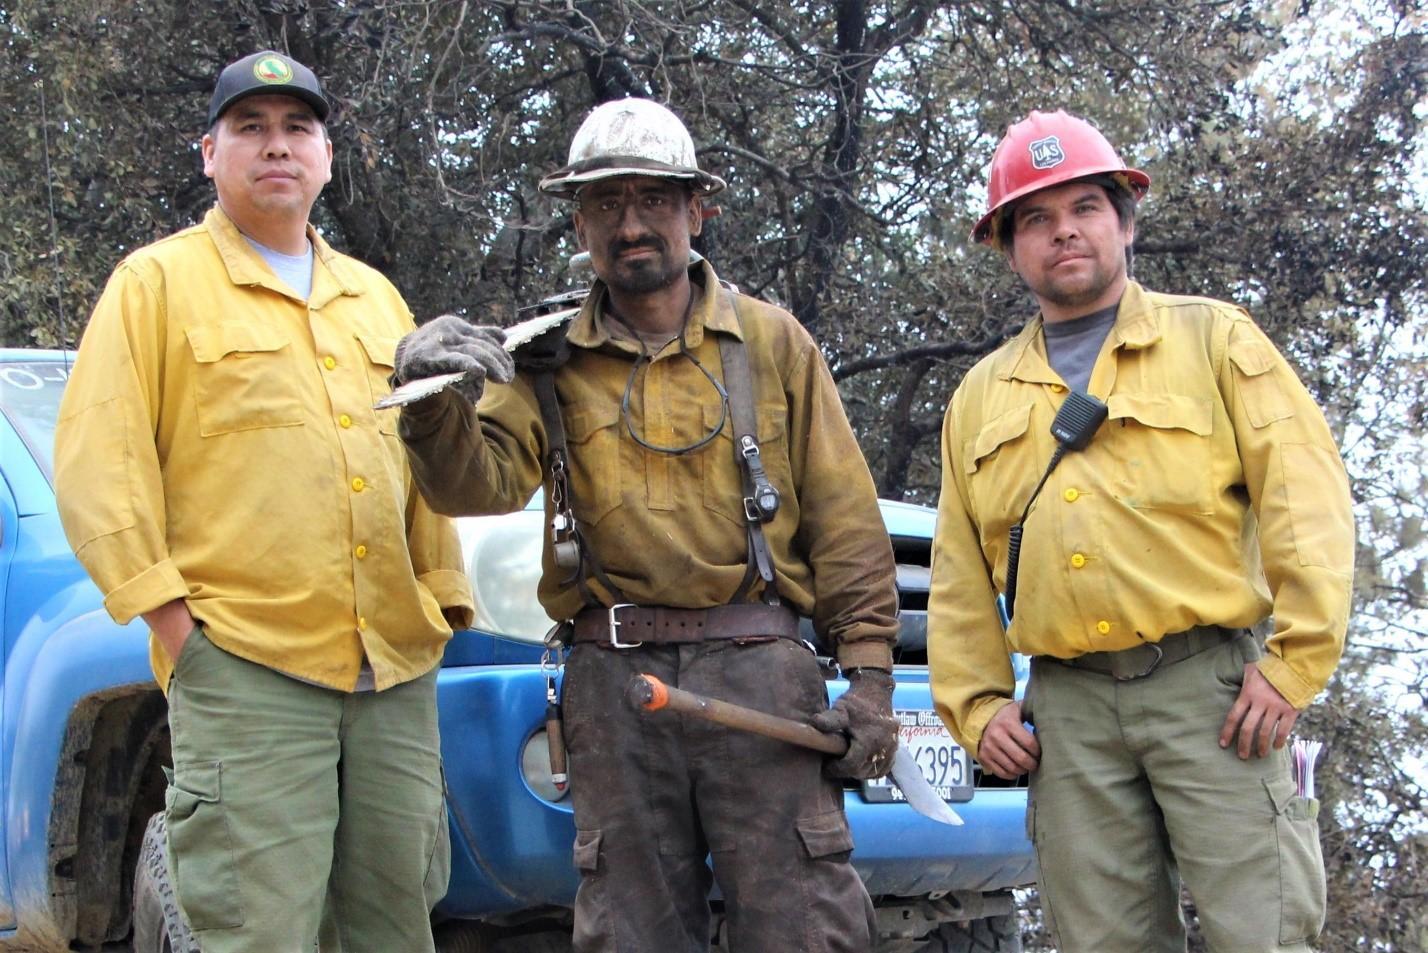 Three men from the Tule River Tribe are pictured from left to right.